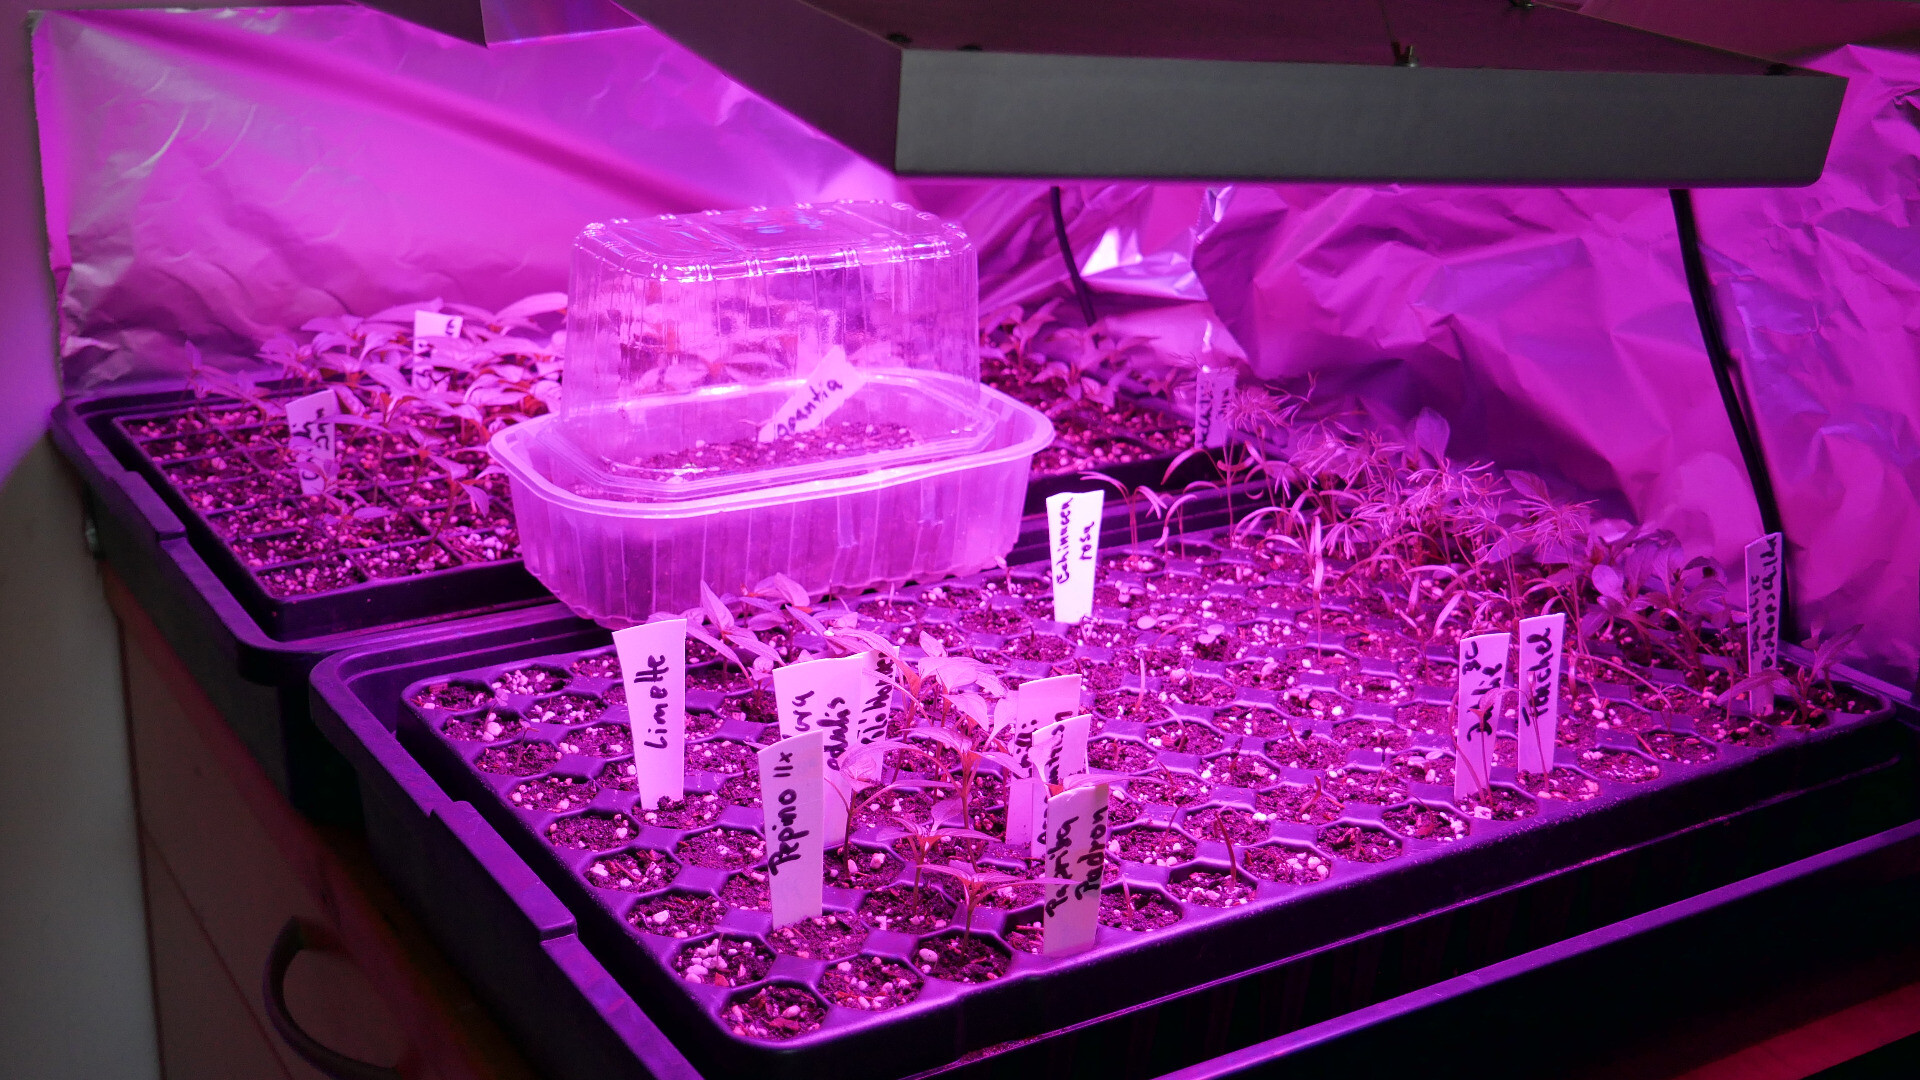 seedlings in seed trays under LED grow lights